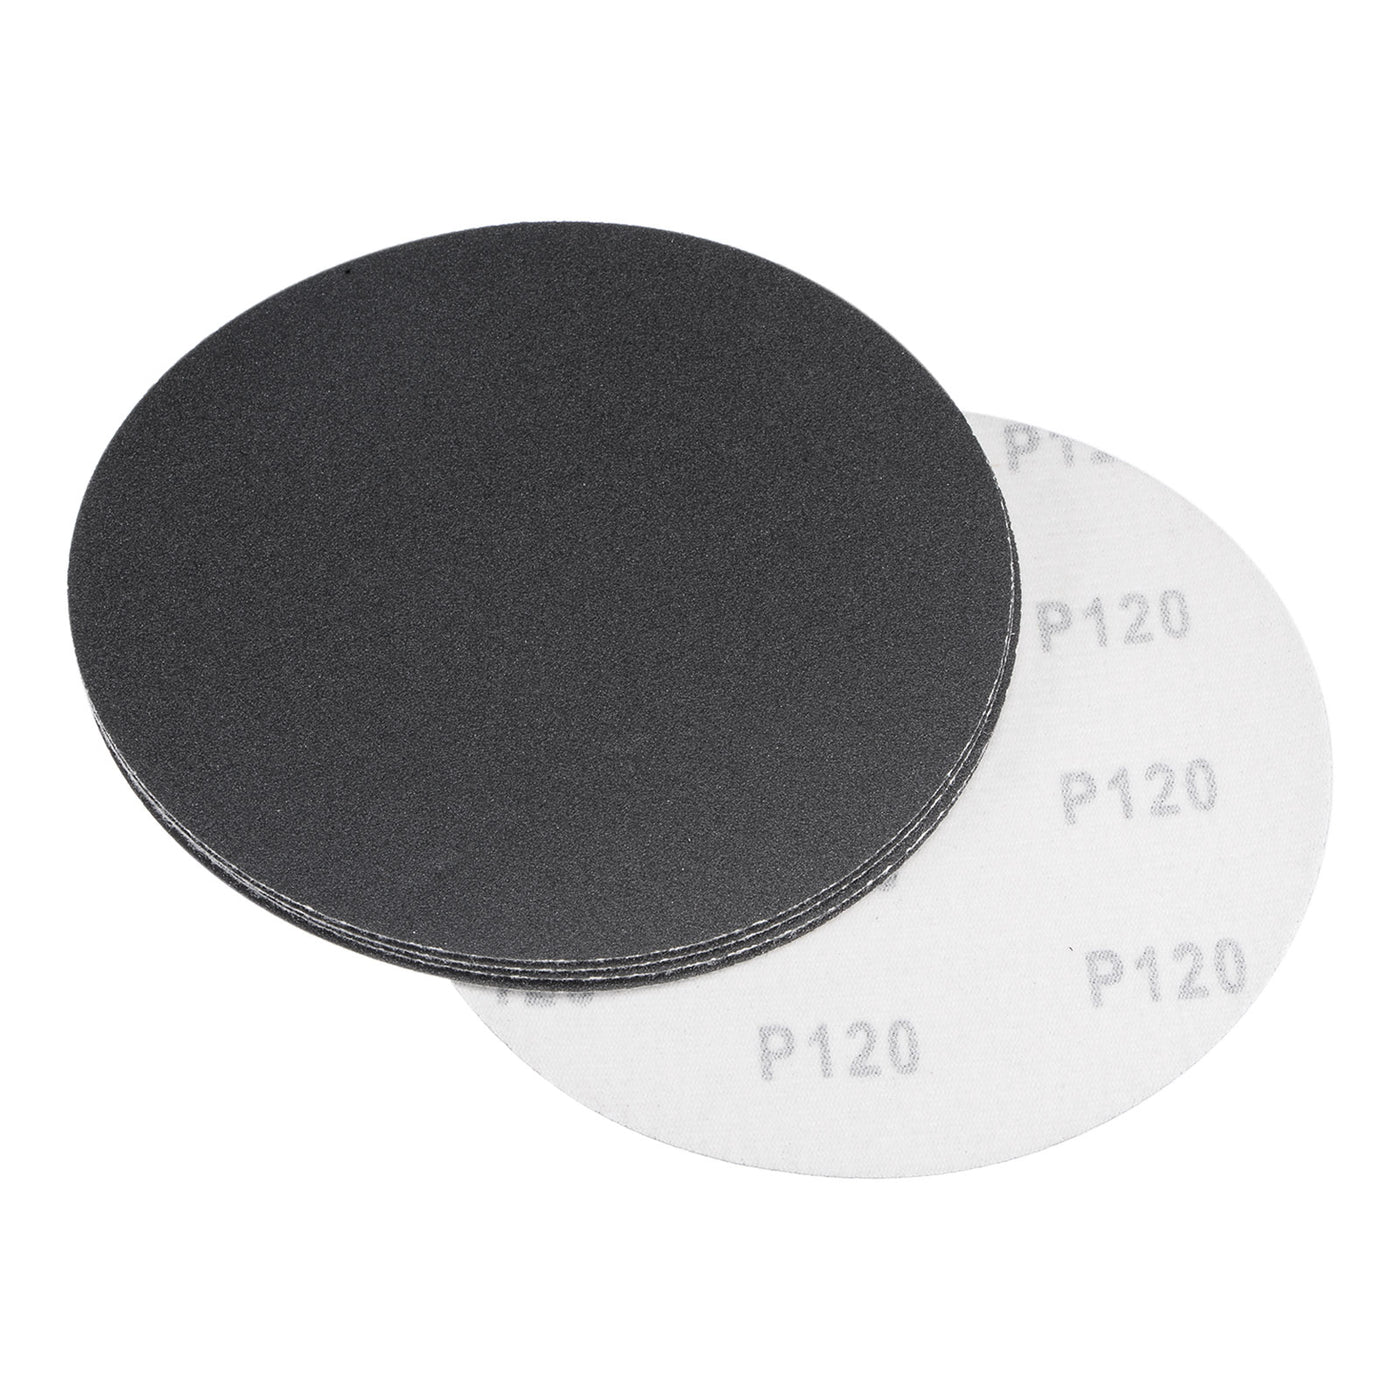 Uxcell Uxcell 6 Inch Sanding Disc 120Grit Hook and Loop Silicon Carbide C-Weight Backing 5Pcs